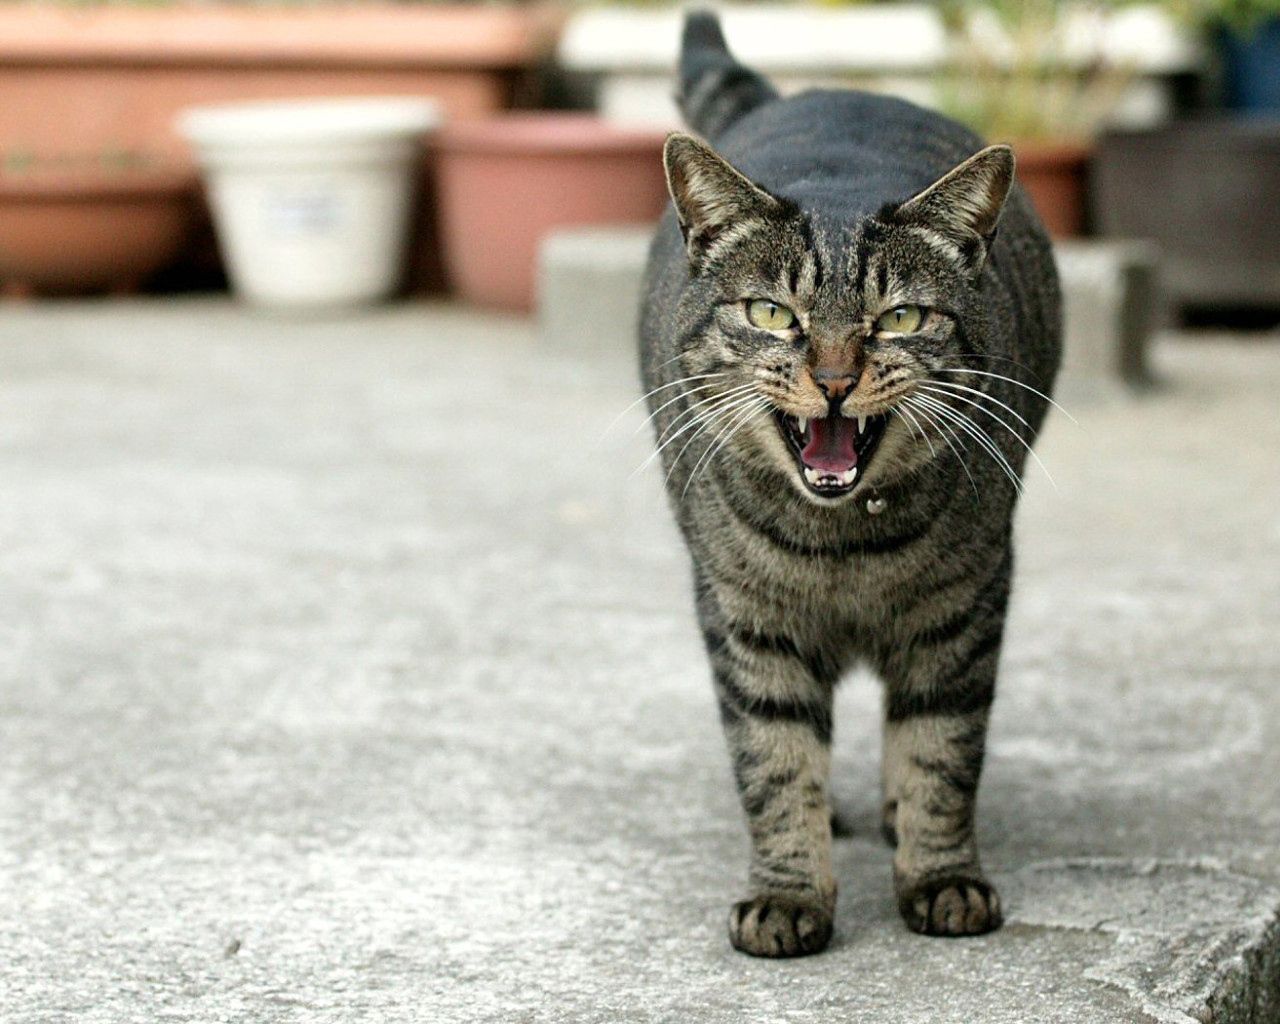 animals, cat, grin, striped, grey, mouth, meow